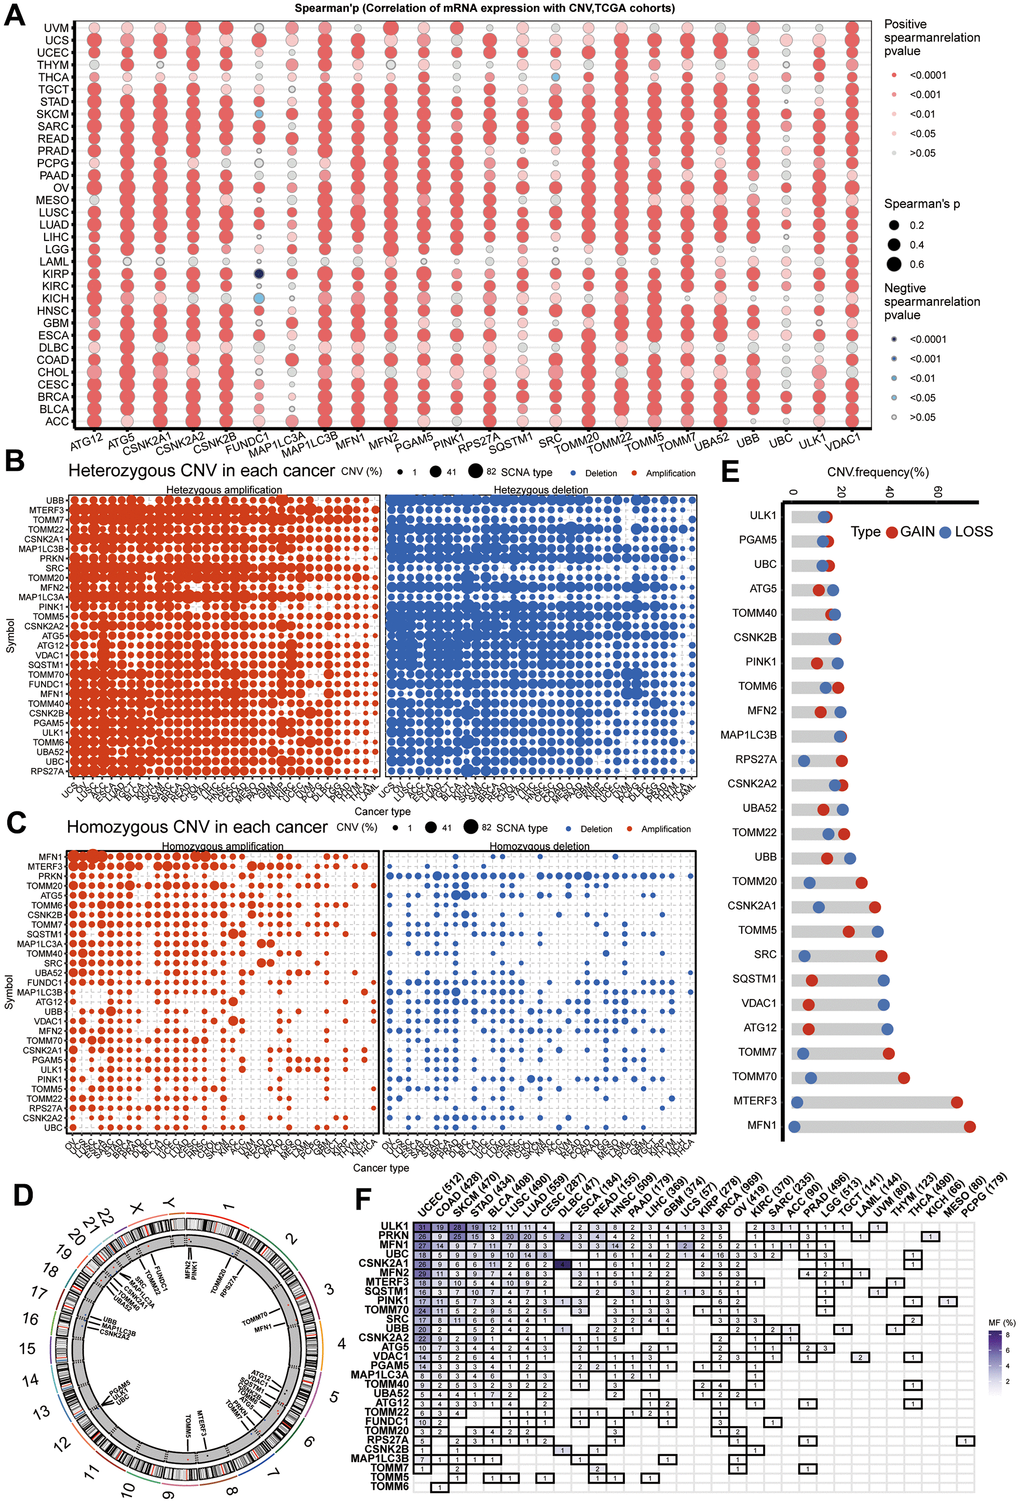 CNV and sequence alteration contribute to abnormal mitophagy genes Levels. (A) CNV strongly correlates to gene expression of mitophagy regulators in pan-cancer using spearman analysis. (B, C) Heterozygous and homozygous amplification/deletion of mitophagy regulators in pan-cancer. Amplification, red; Deletion, blue. (D) The location of CNV of mitophagy regulators on 23 chromosomes. (E) CNV of mitophagy regulators in TCGA-HNSC dataset. CNV loss, blue; CNV gain, red. (F) Mutation frequency of mitophagy regulators in pan-cancer.